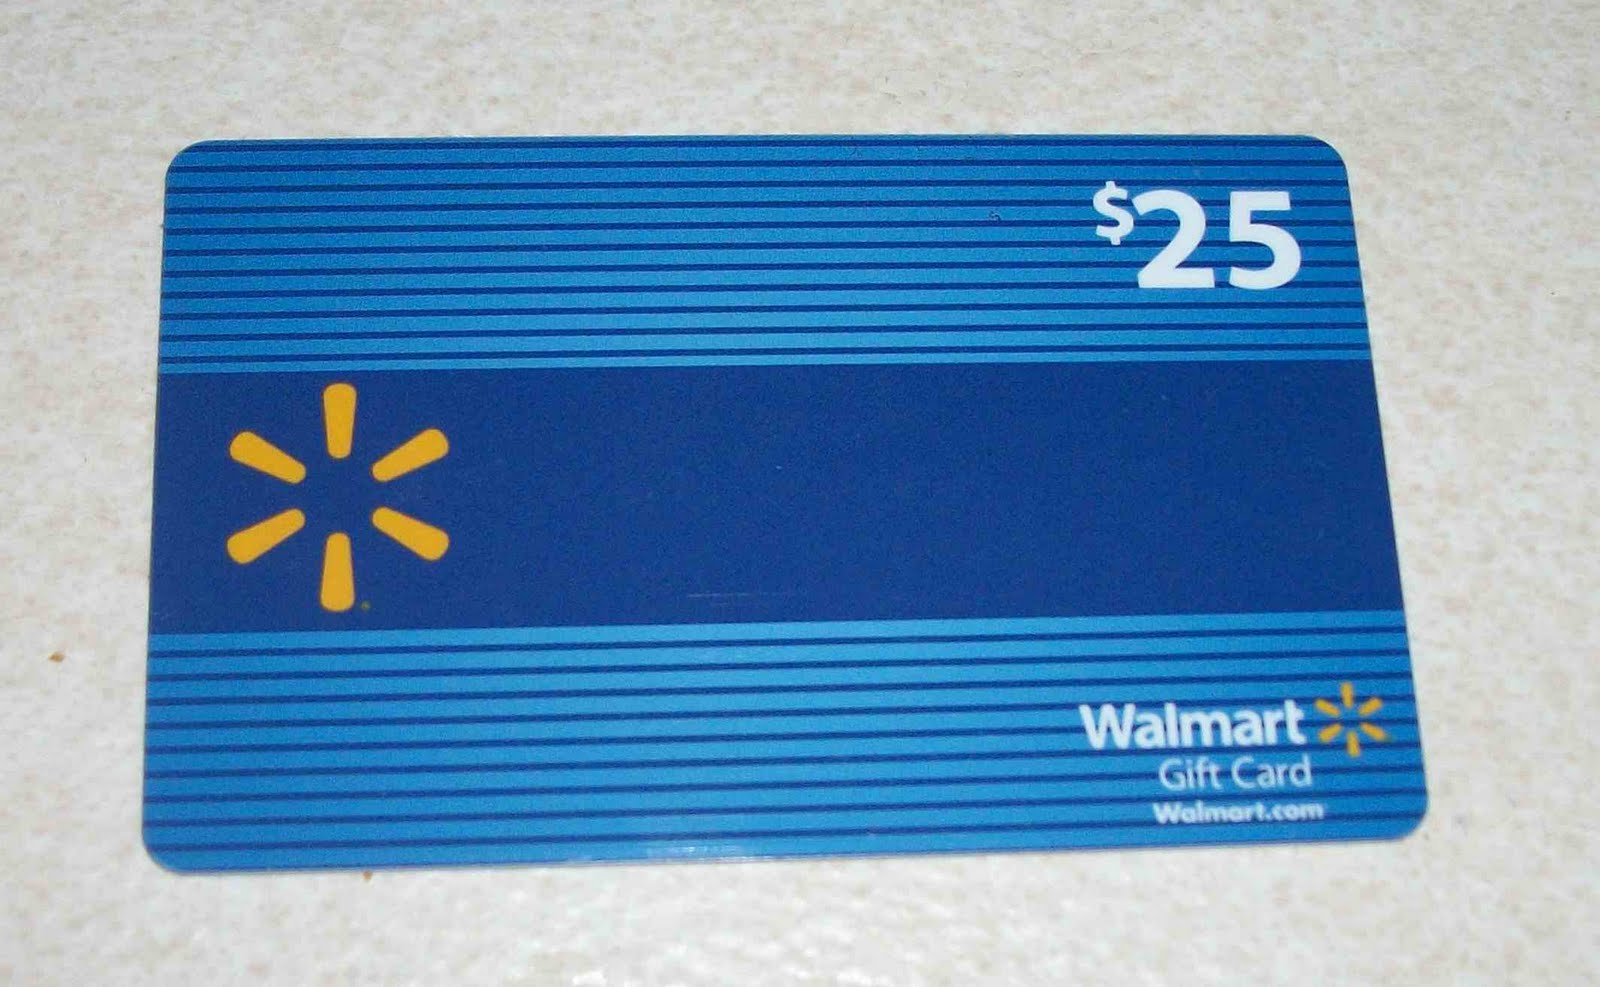 year-4-freebies-25-wal-mart-gift-card-received-from-mypoints